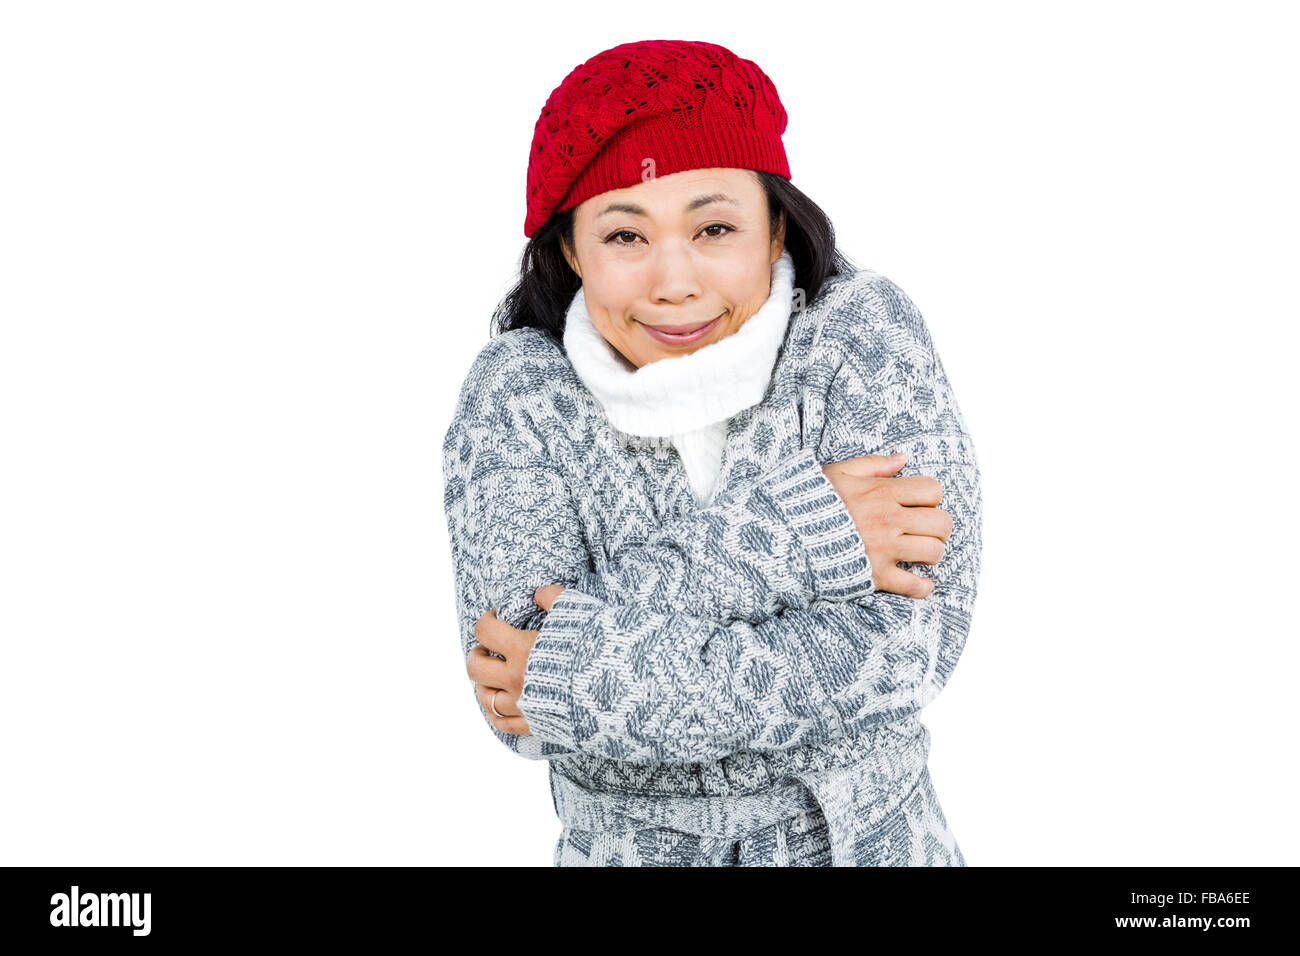 Portrait of woman in cold weather Stock Photo